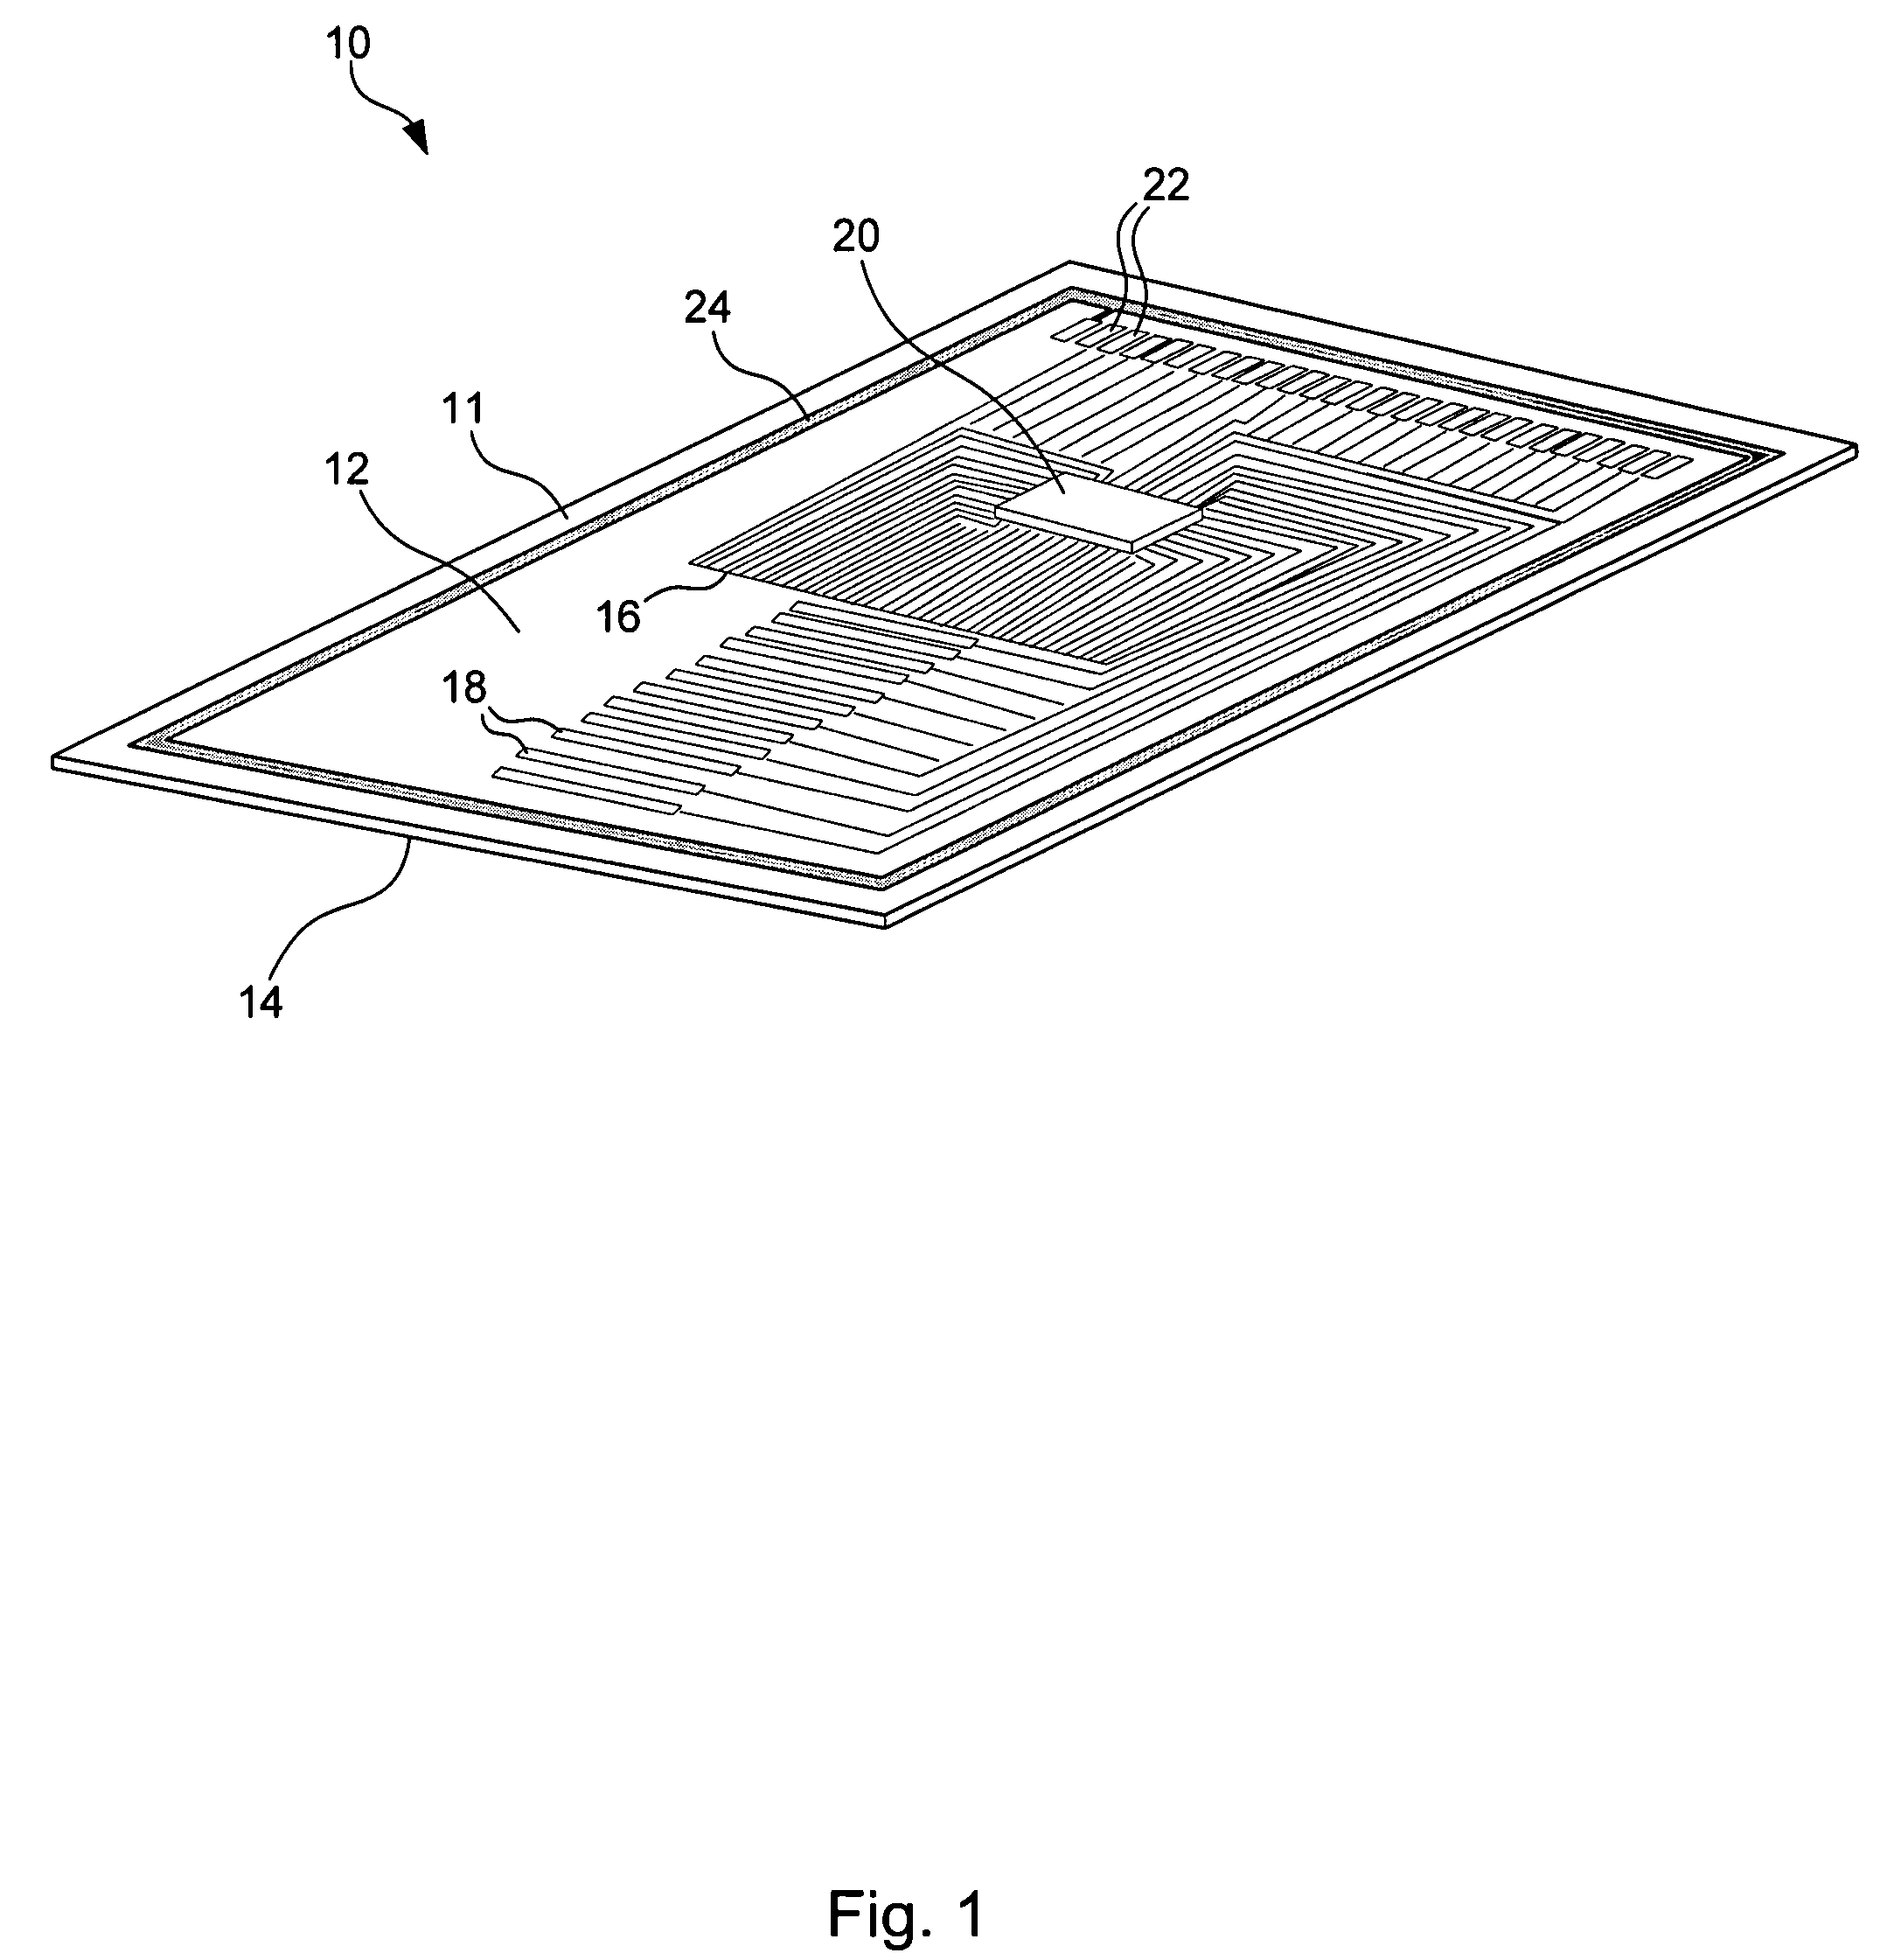 Apparatus and method for protecting fingerprint sensing circuitry from electrostatic discharge